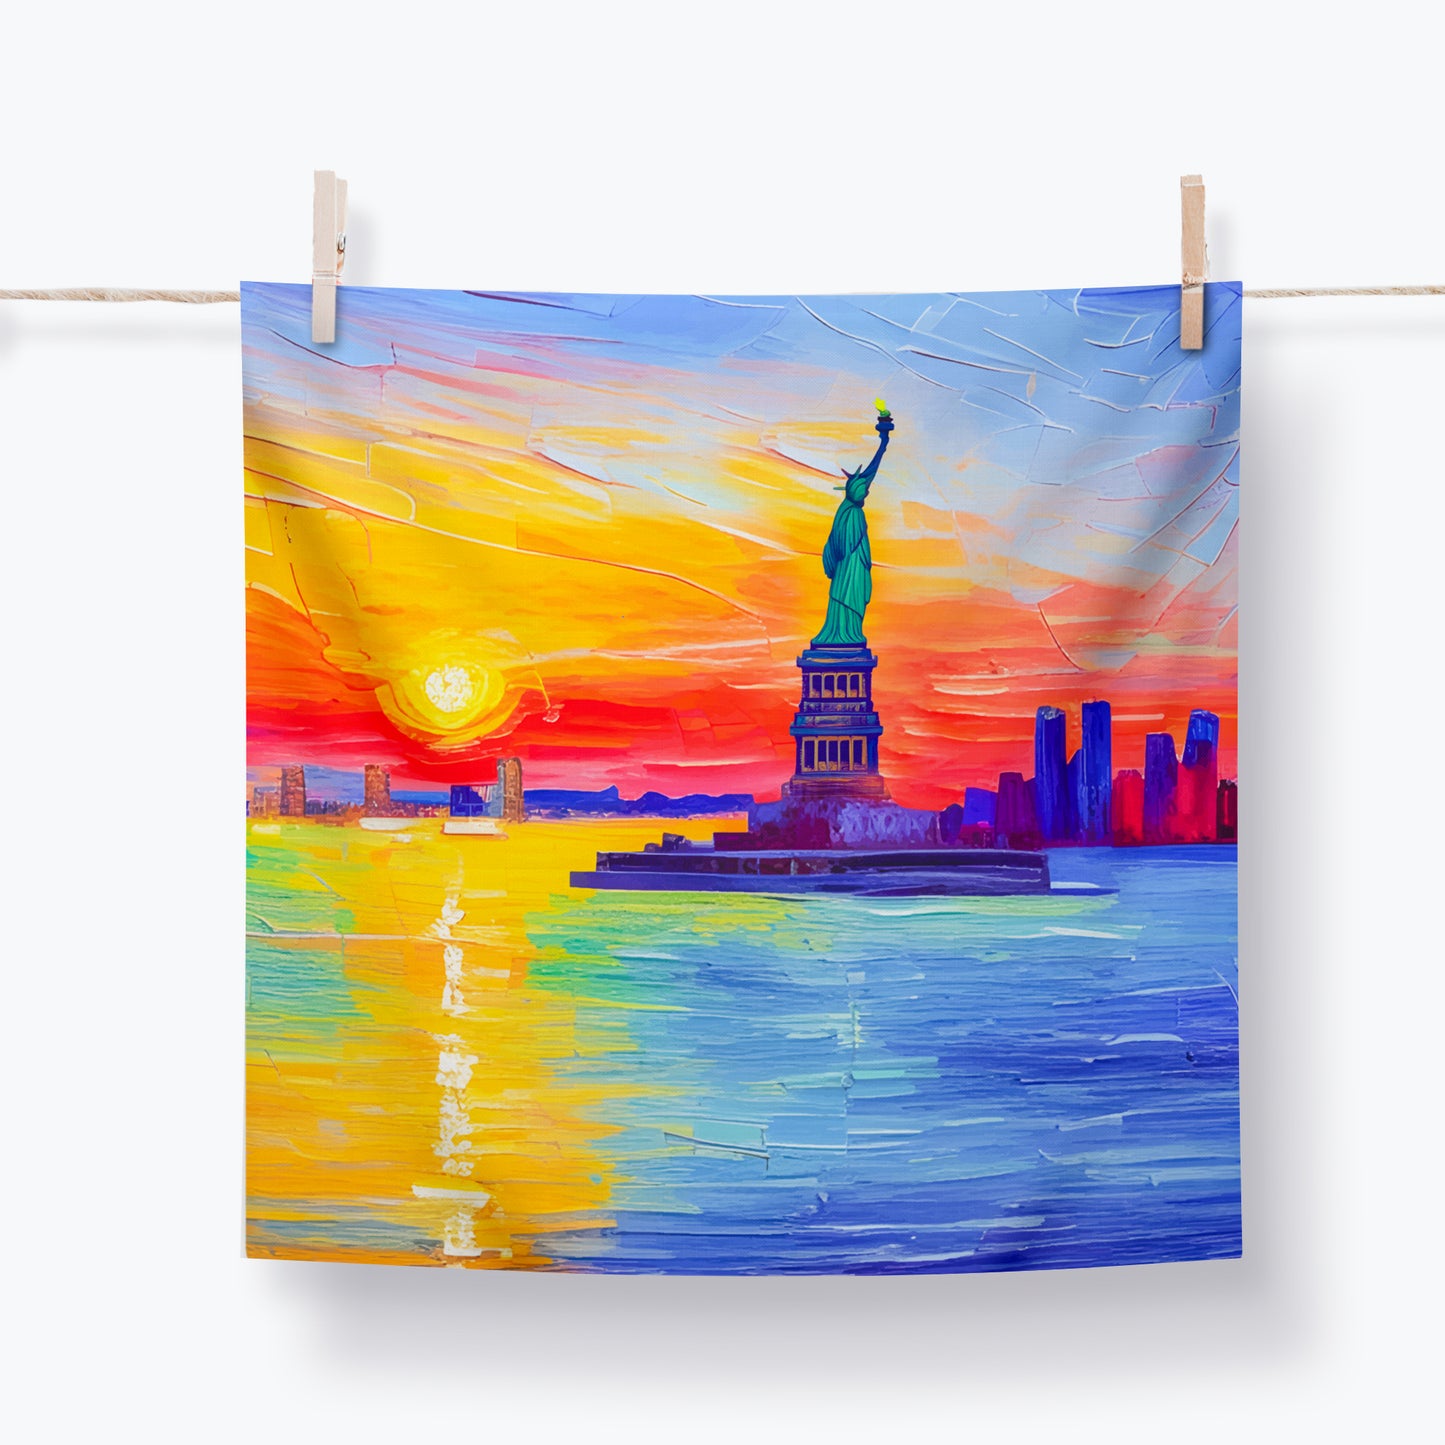 Two-sided premium pillow case with cityscape painting print - New York | Seepu